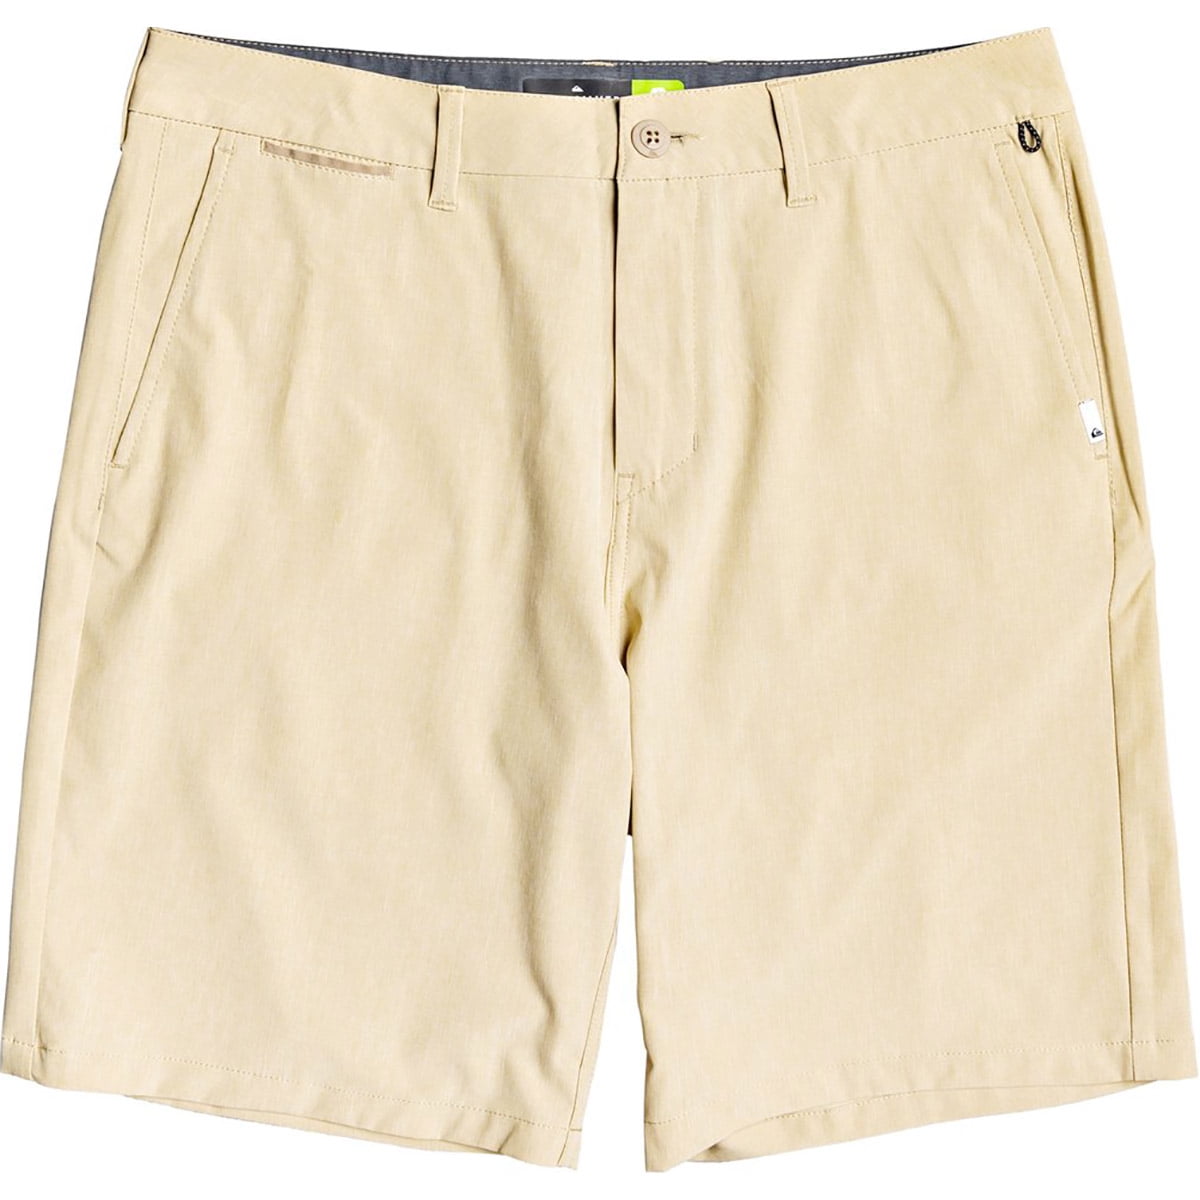 Buy > quiksilver amphibian shorts walkshorts for the water > in stock